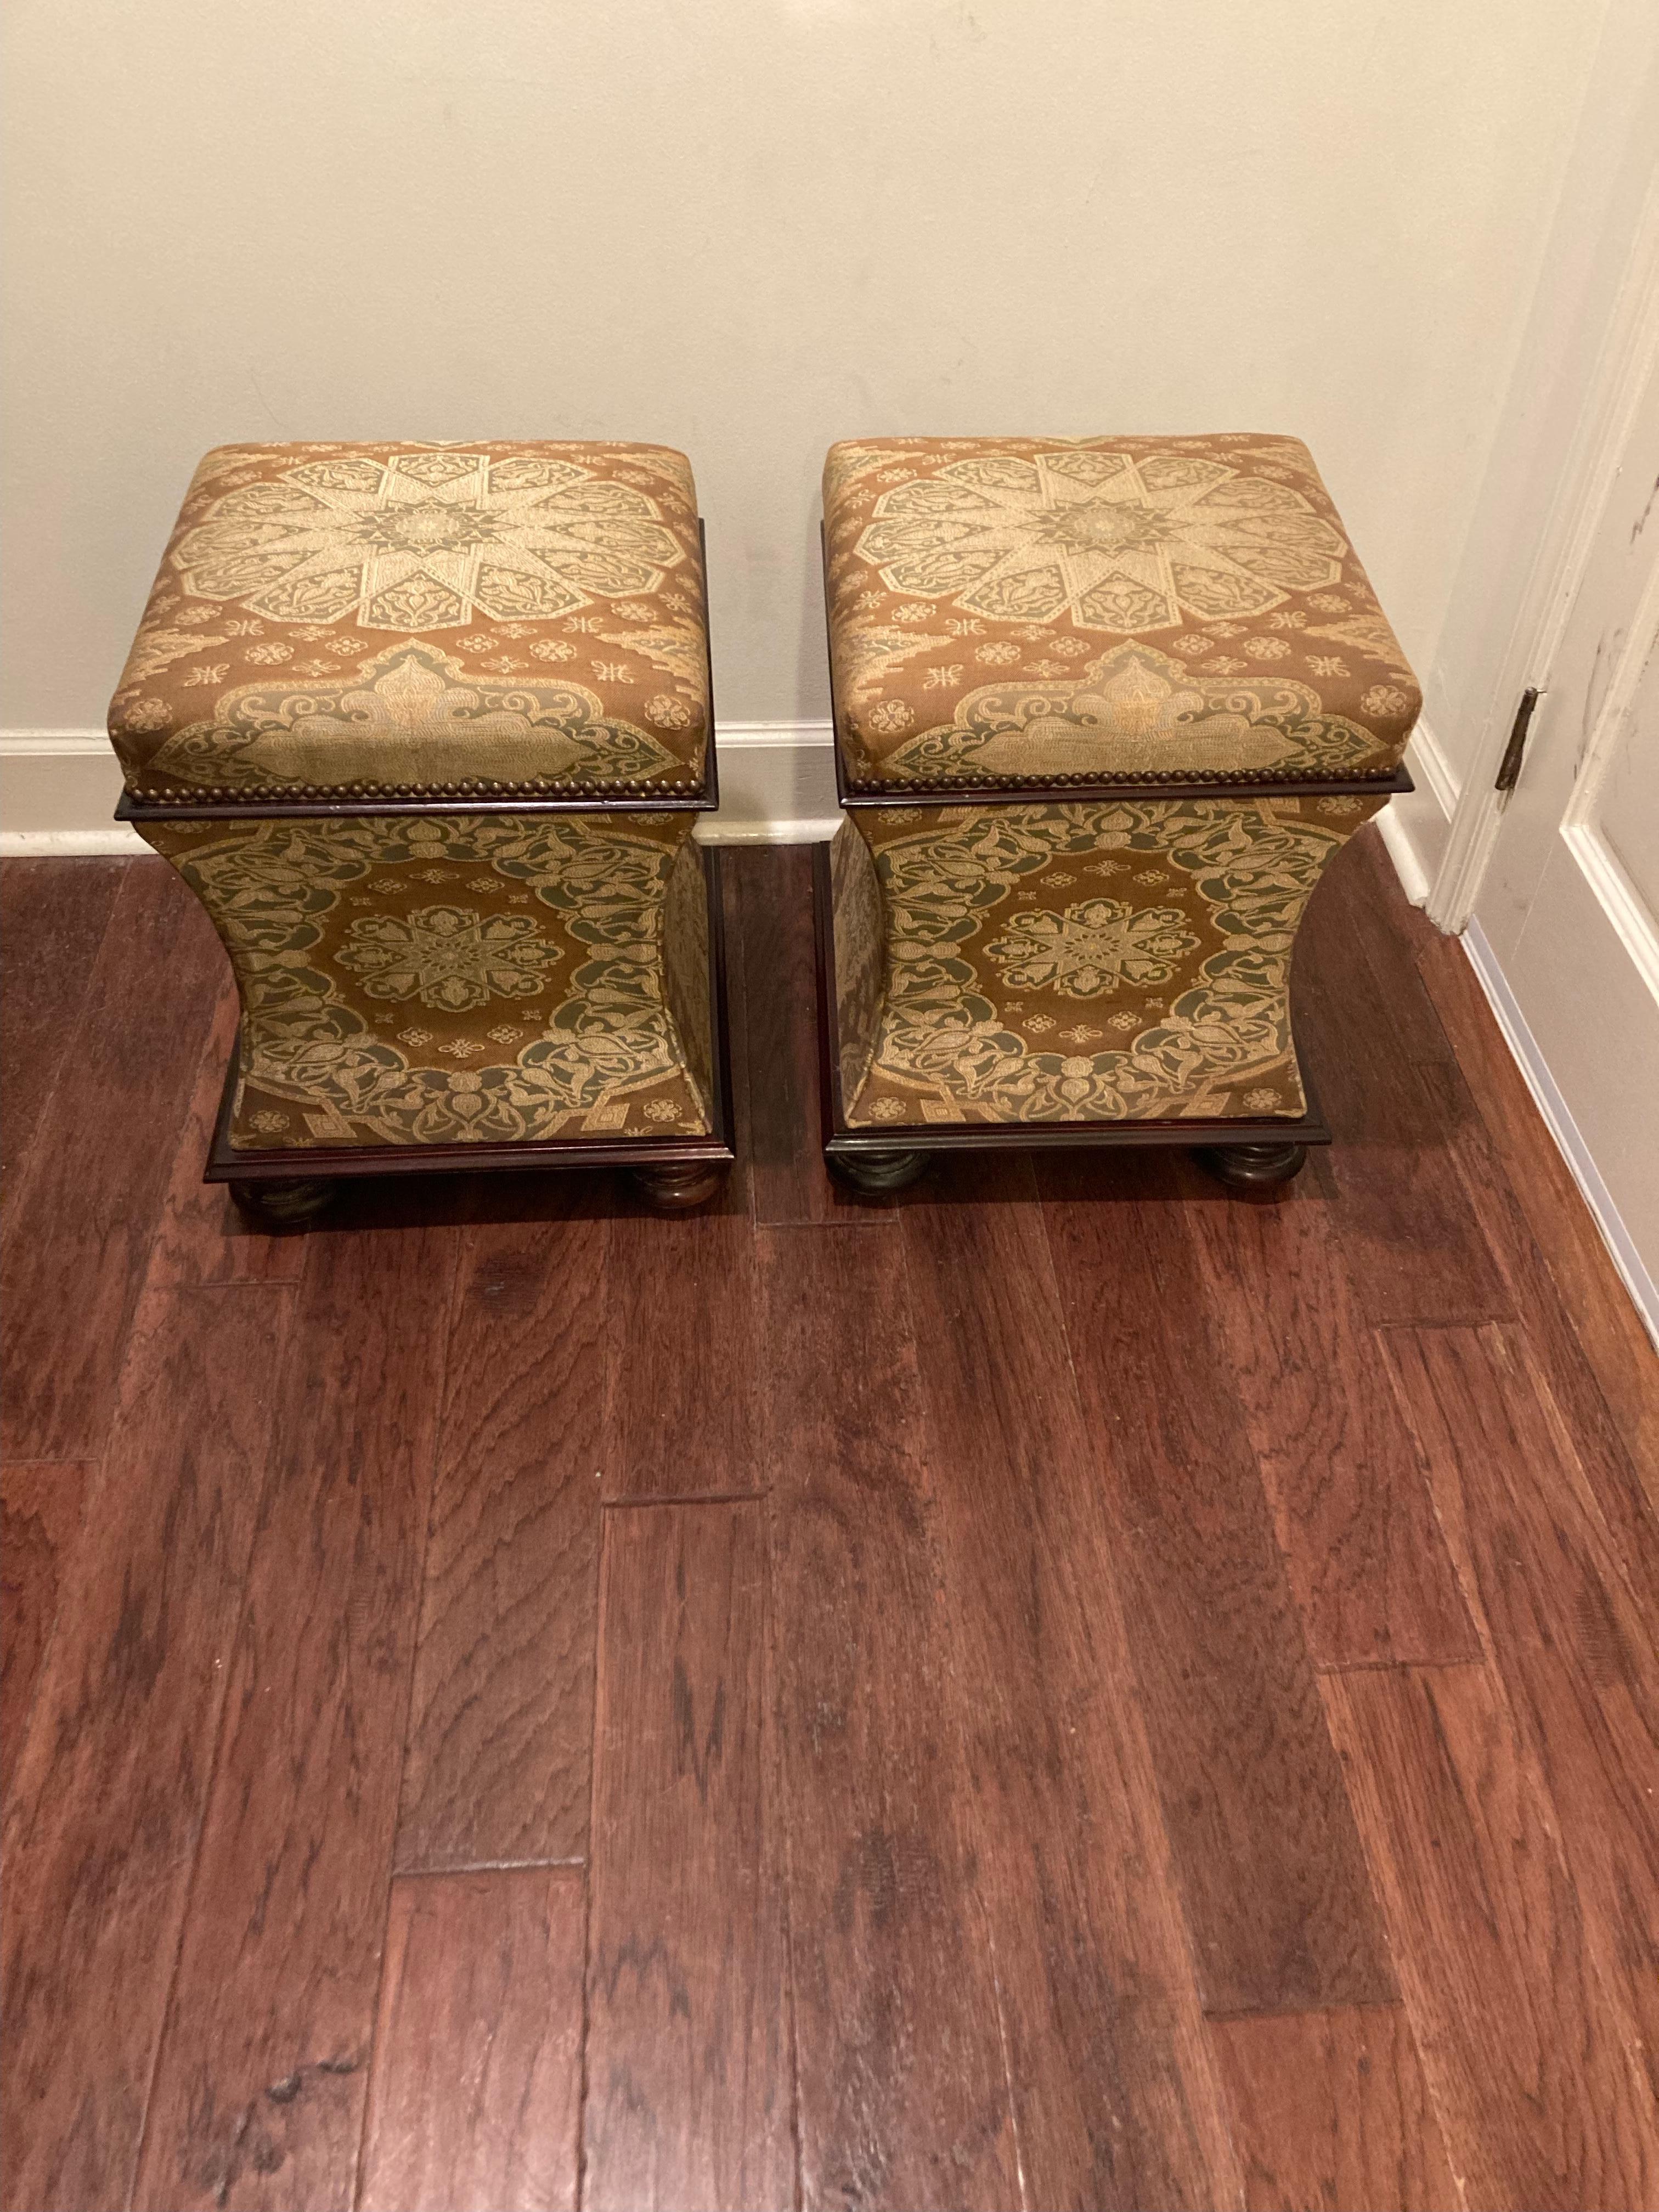 Late 20th Century Luxurious George Smith Baby Belville Hourglass Shaped Storage Ottomans